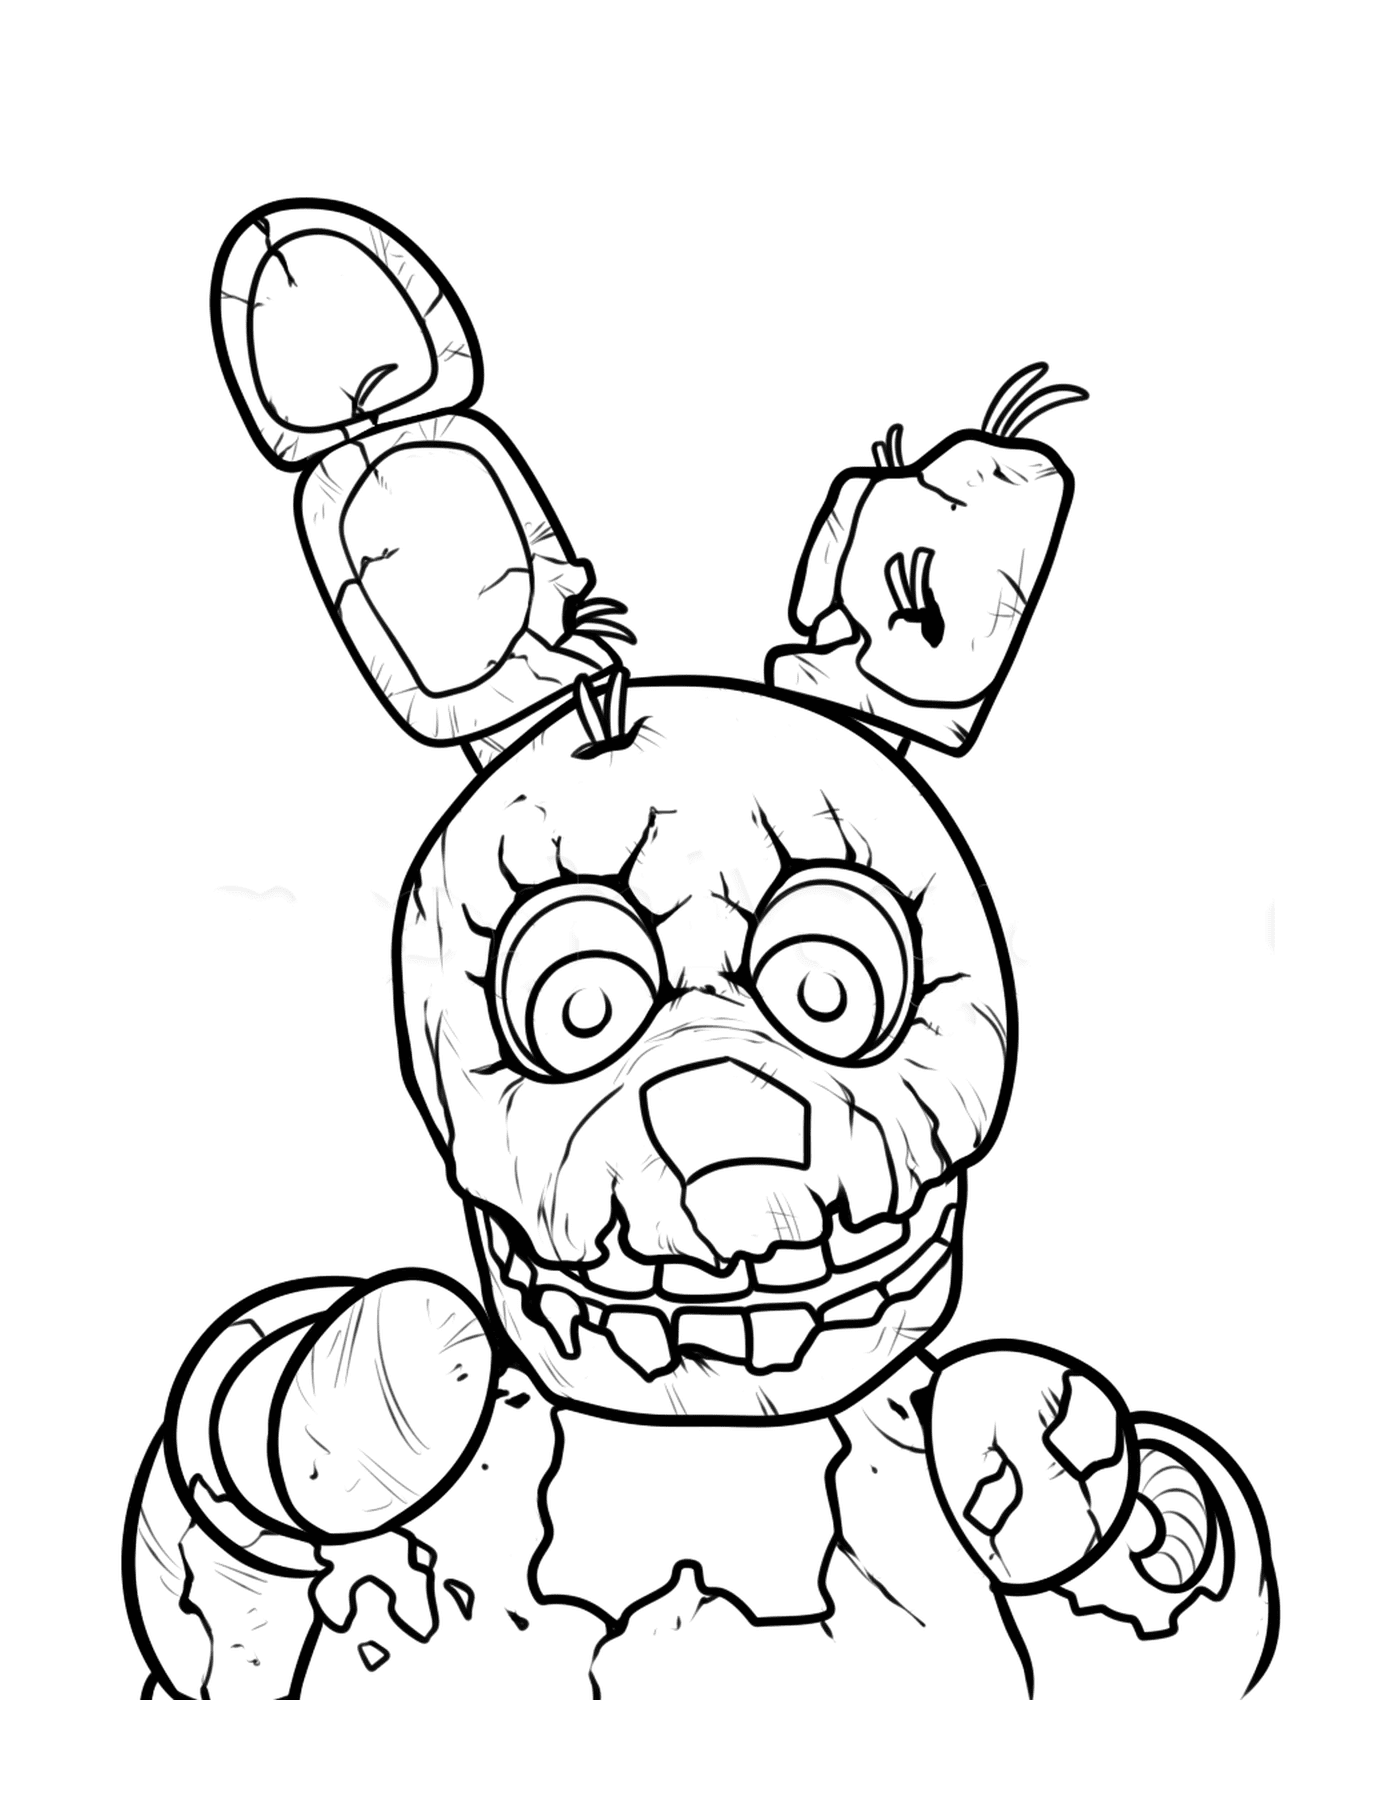  A scary character from Five Nights at Freddy's 